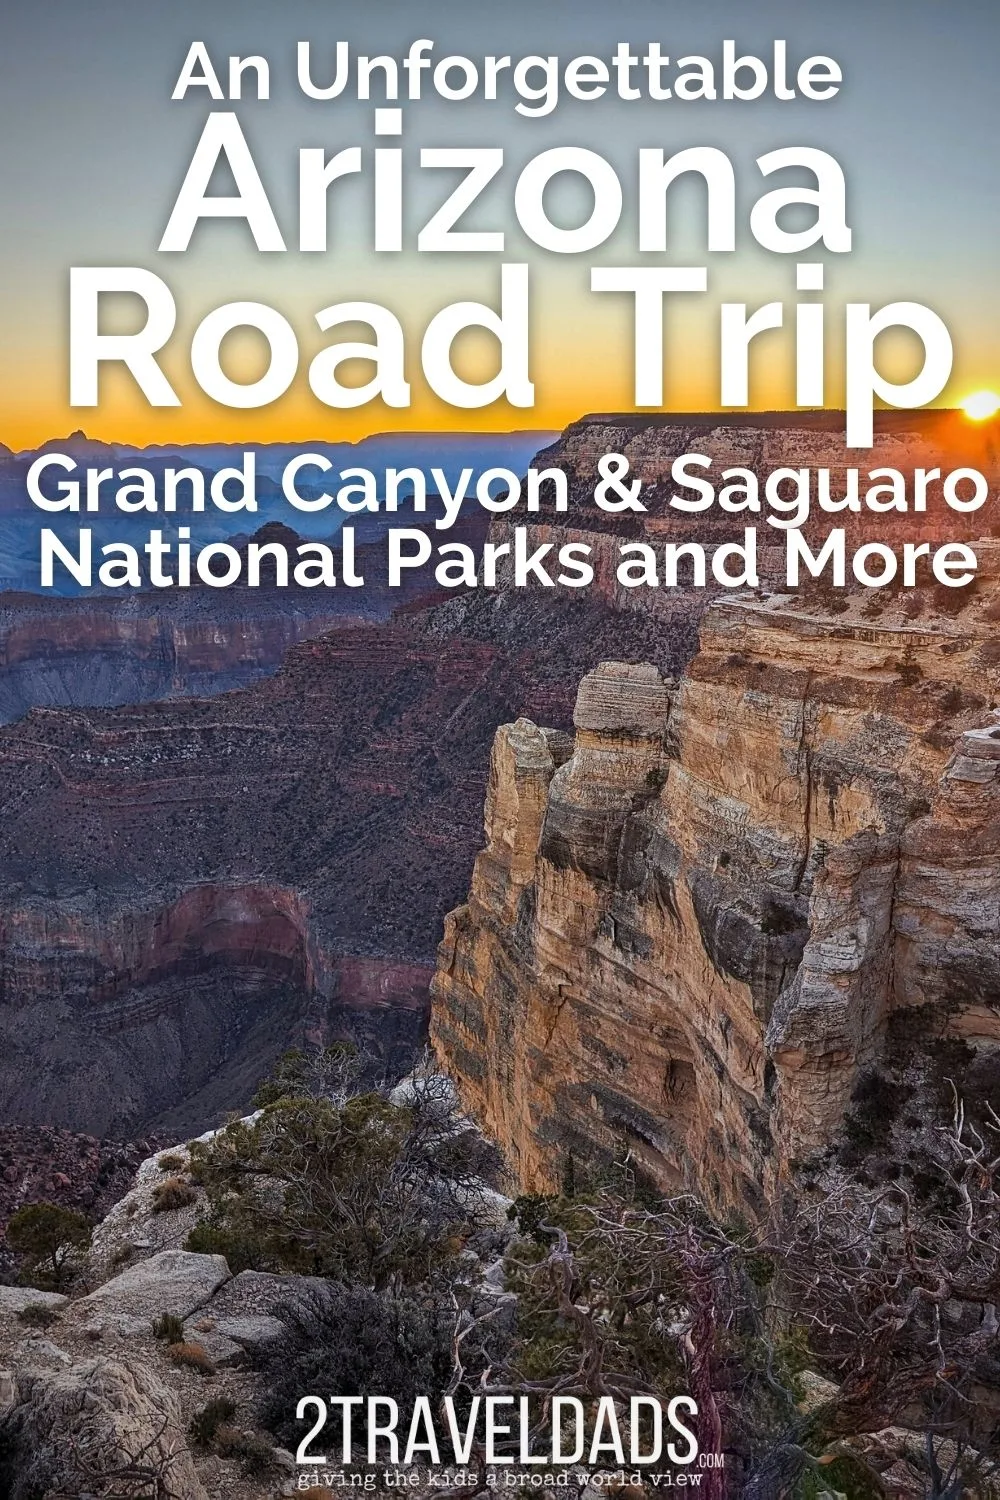 You will be stunned by how surprising an Arizona road trip can be. Yes, there are cactus and roadrunners, but there's so much more. From Grand Canyon National Park to ruins and even hipster nightlife, we've got an awesome plan for a road trip around Arizona!